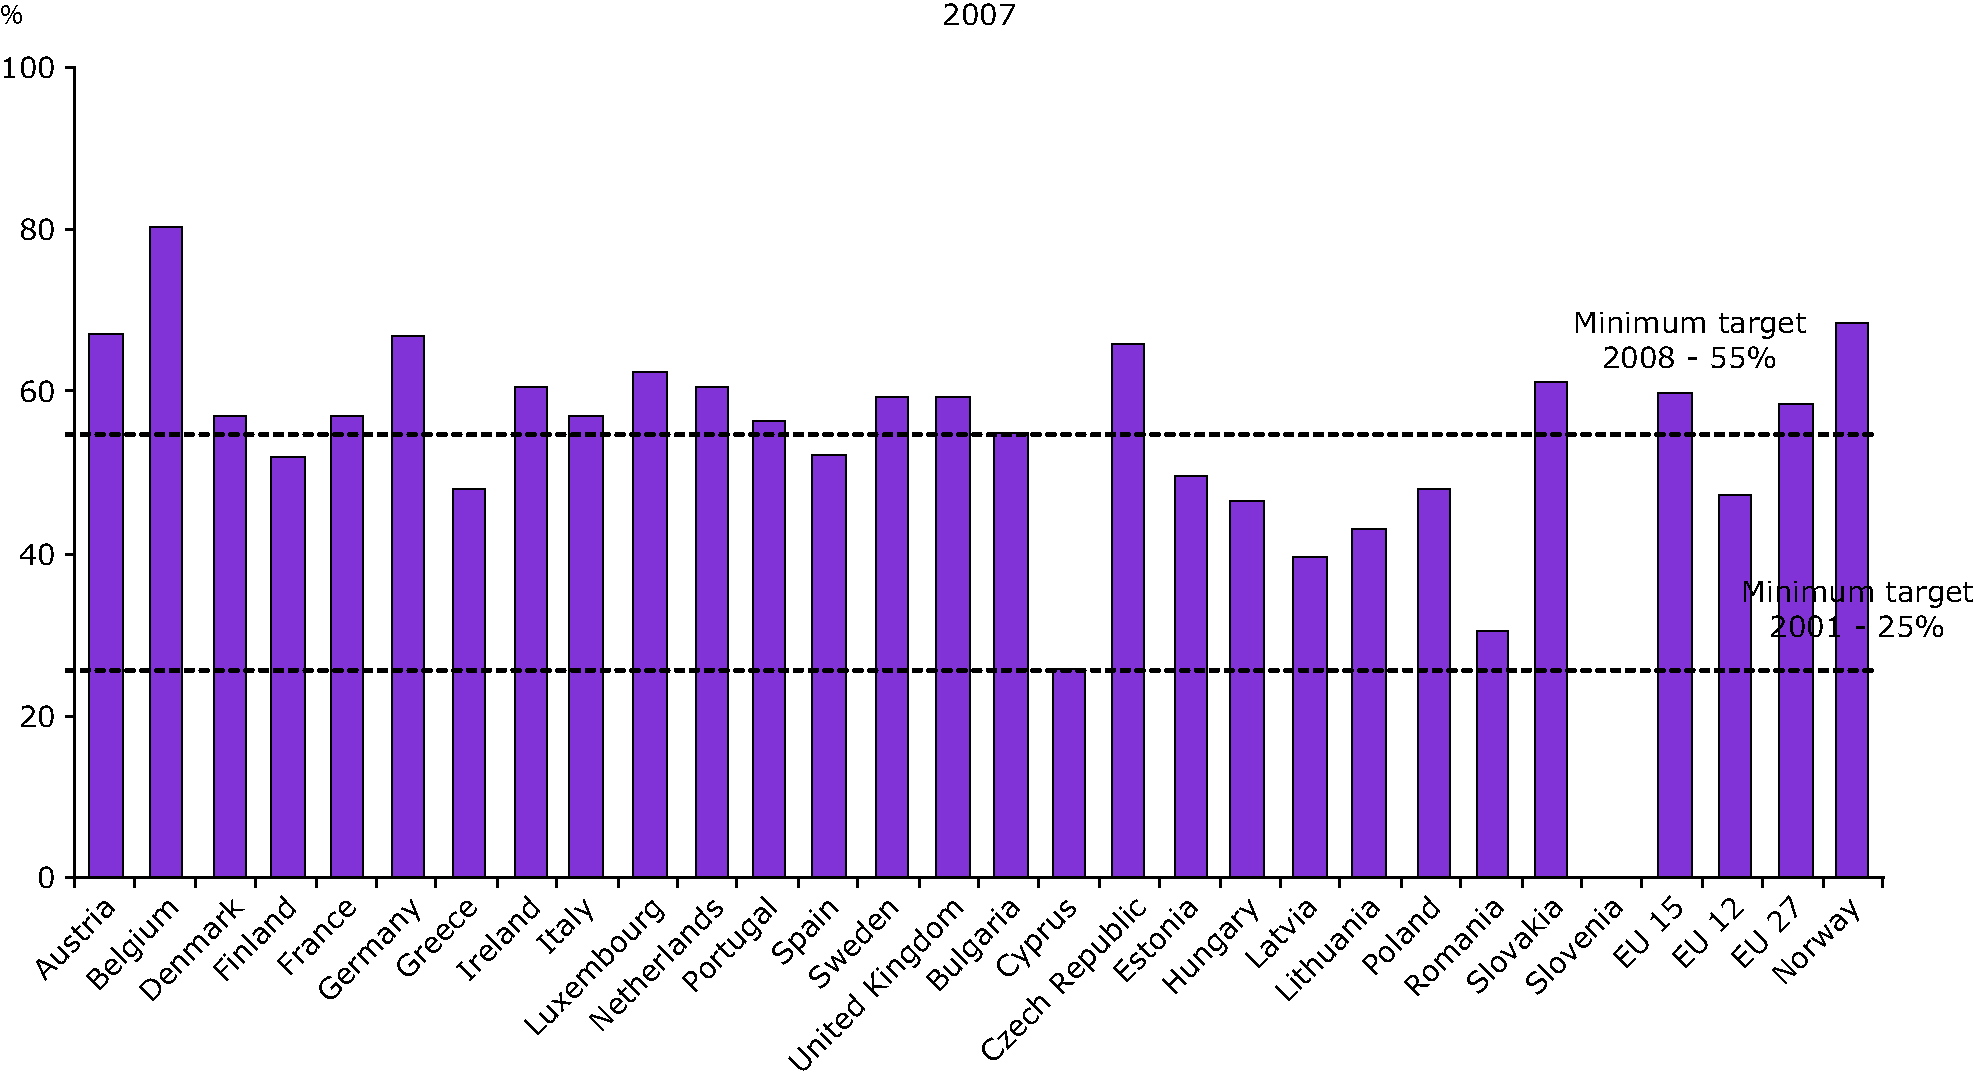 Recycling of packaging waste by country, 2007